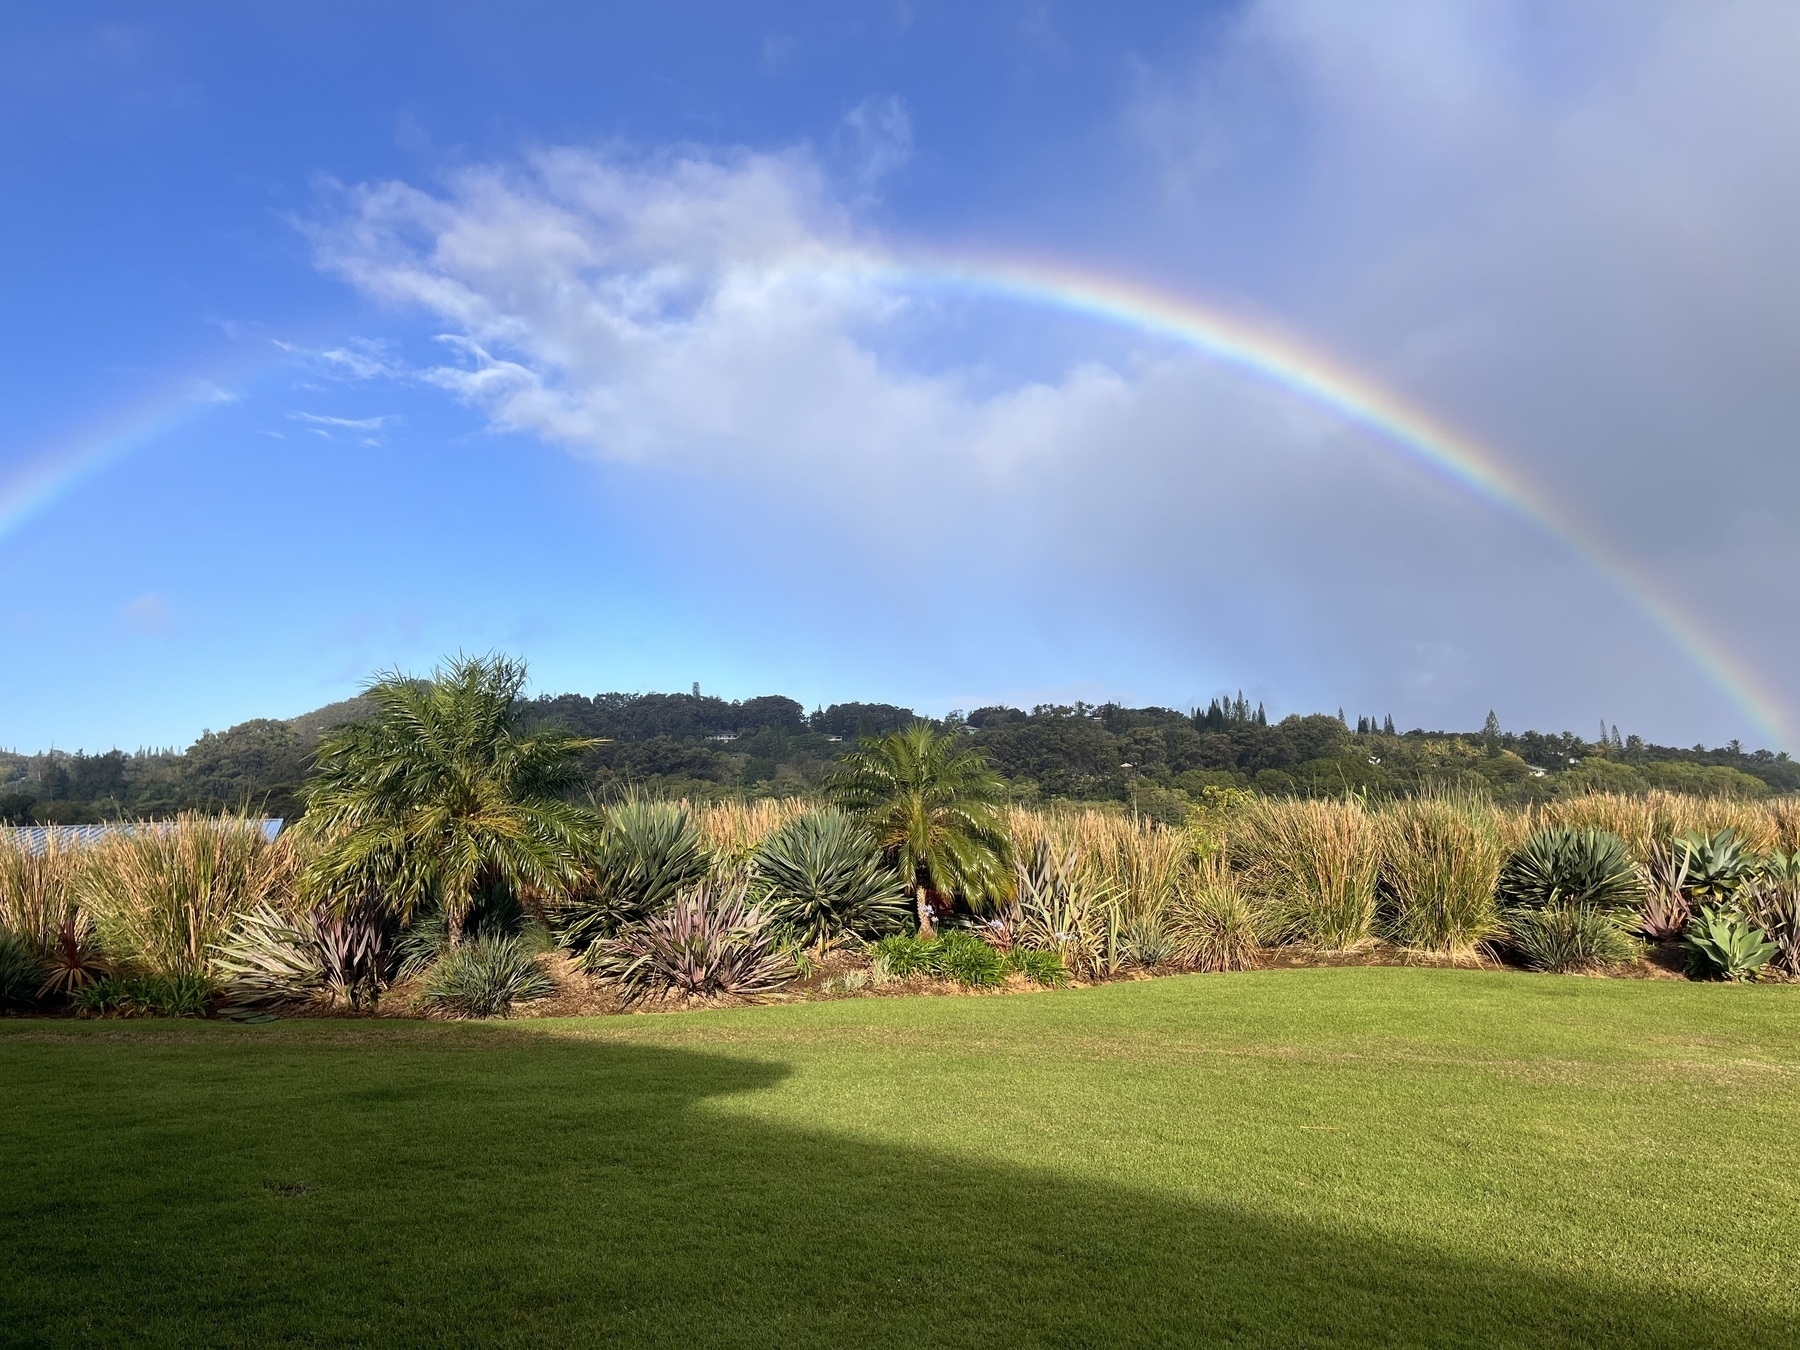 A rainbow traverses the sky, slightly broken by cloud. In the foreground is a flower bed full of vegetation and a lawn.